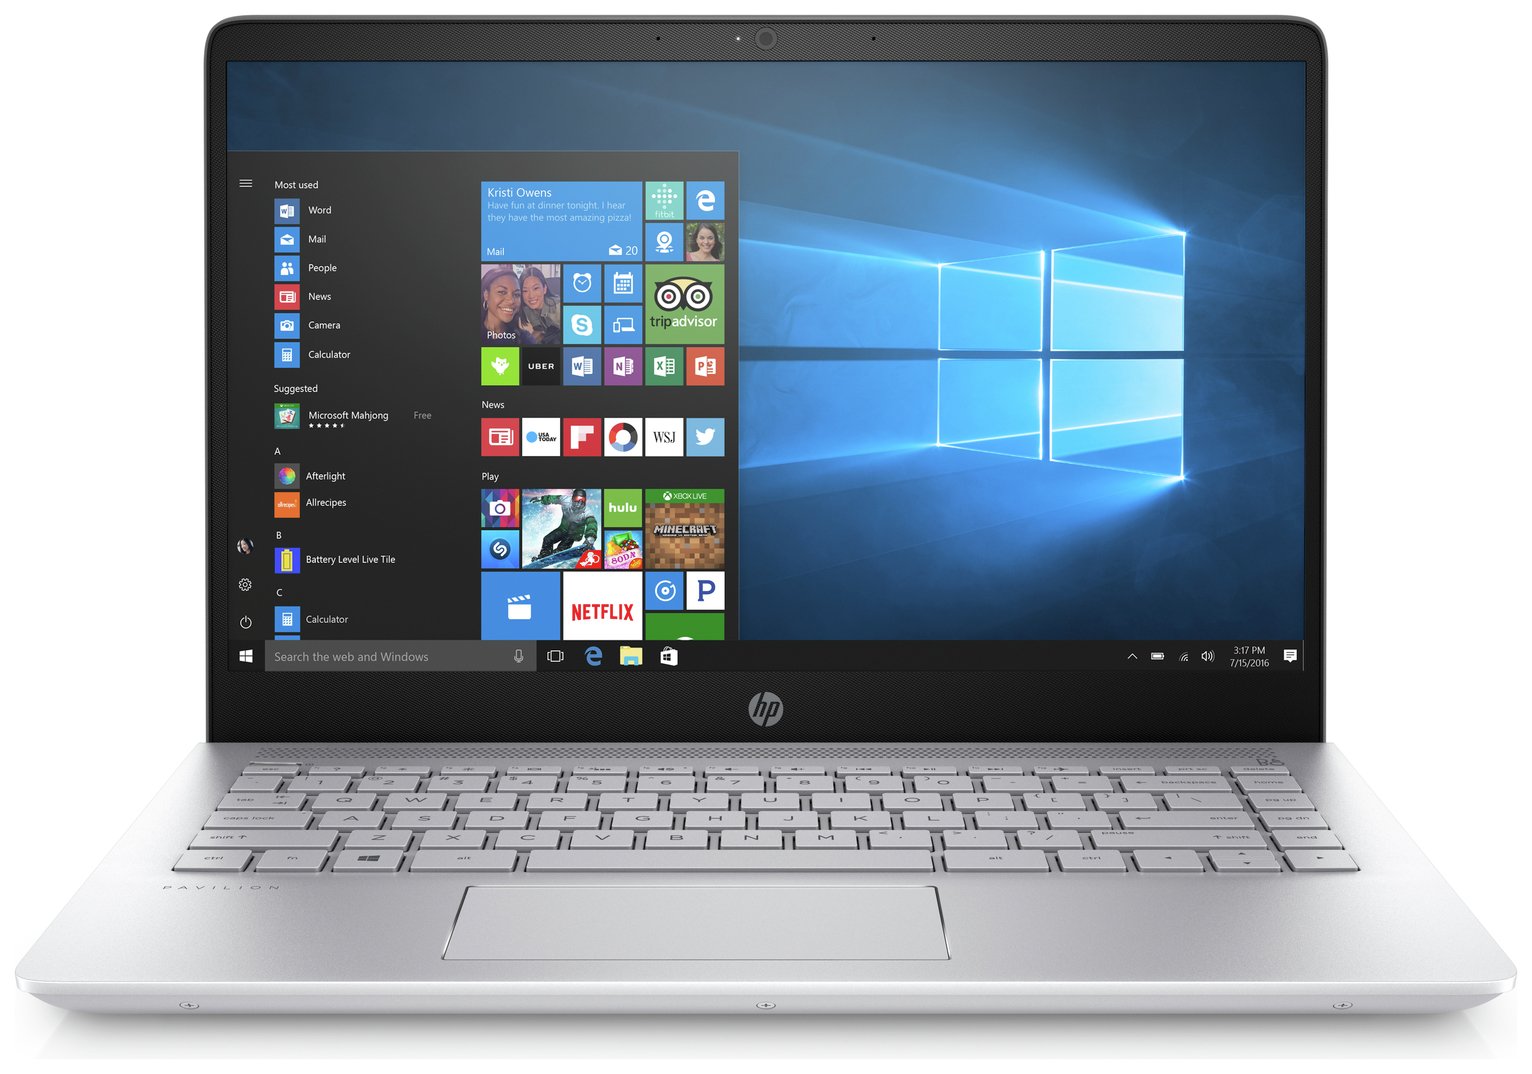 HP Pavilion Pro 14 Inch i3 8GB 256GB SSD Laptop Review